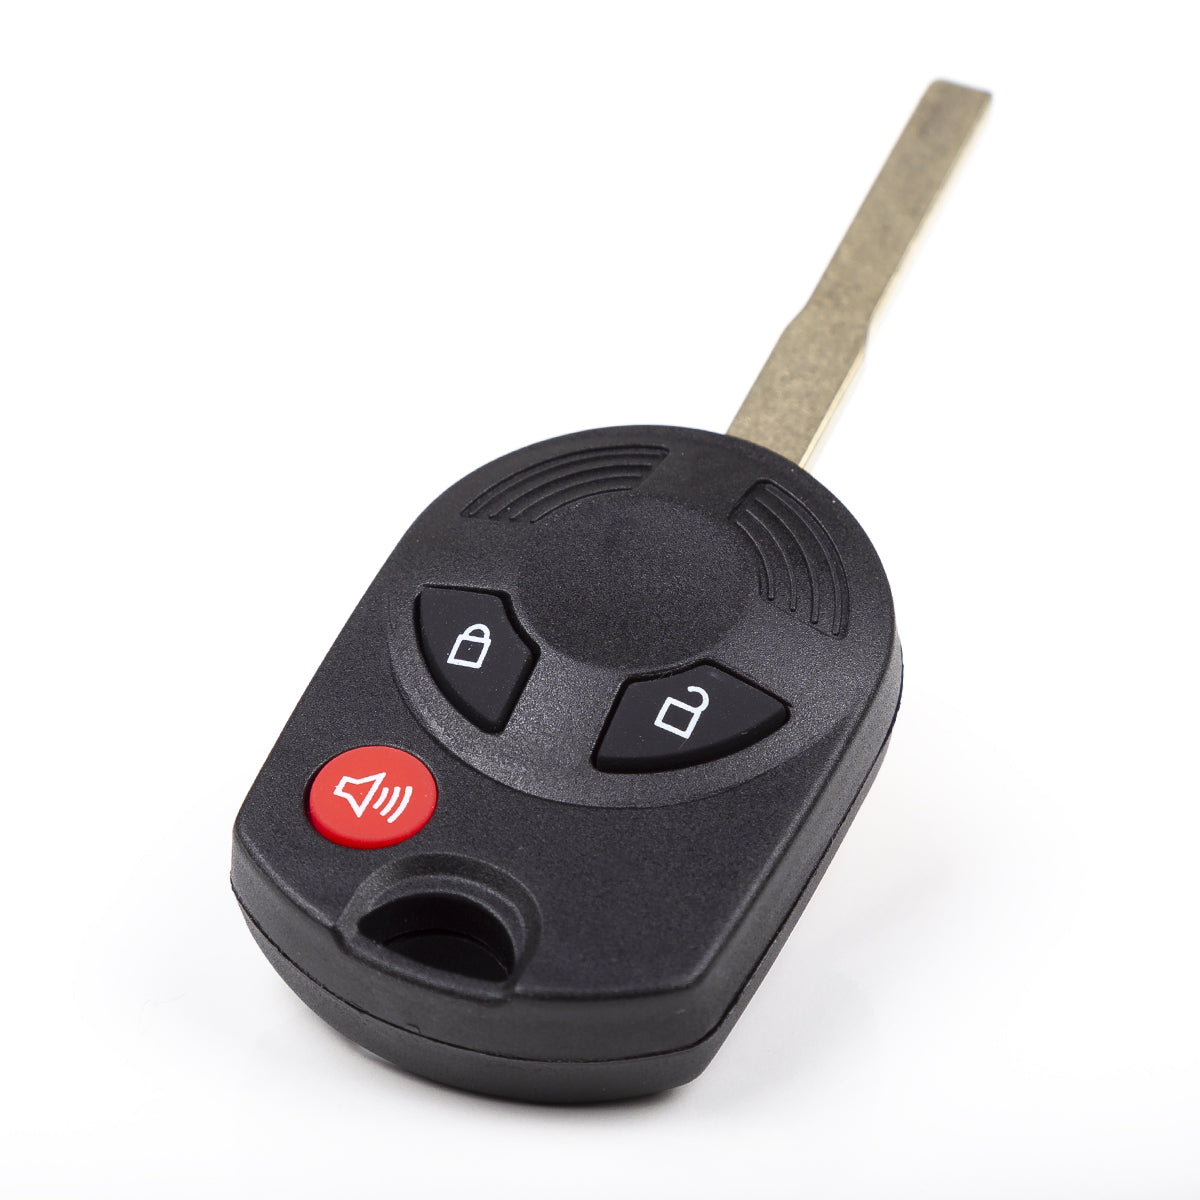 Options for Ford Escape Key Fob Replacements